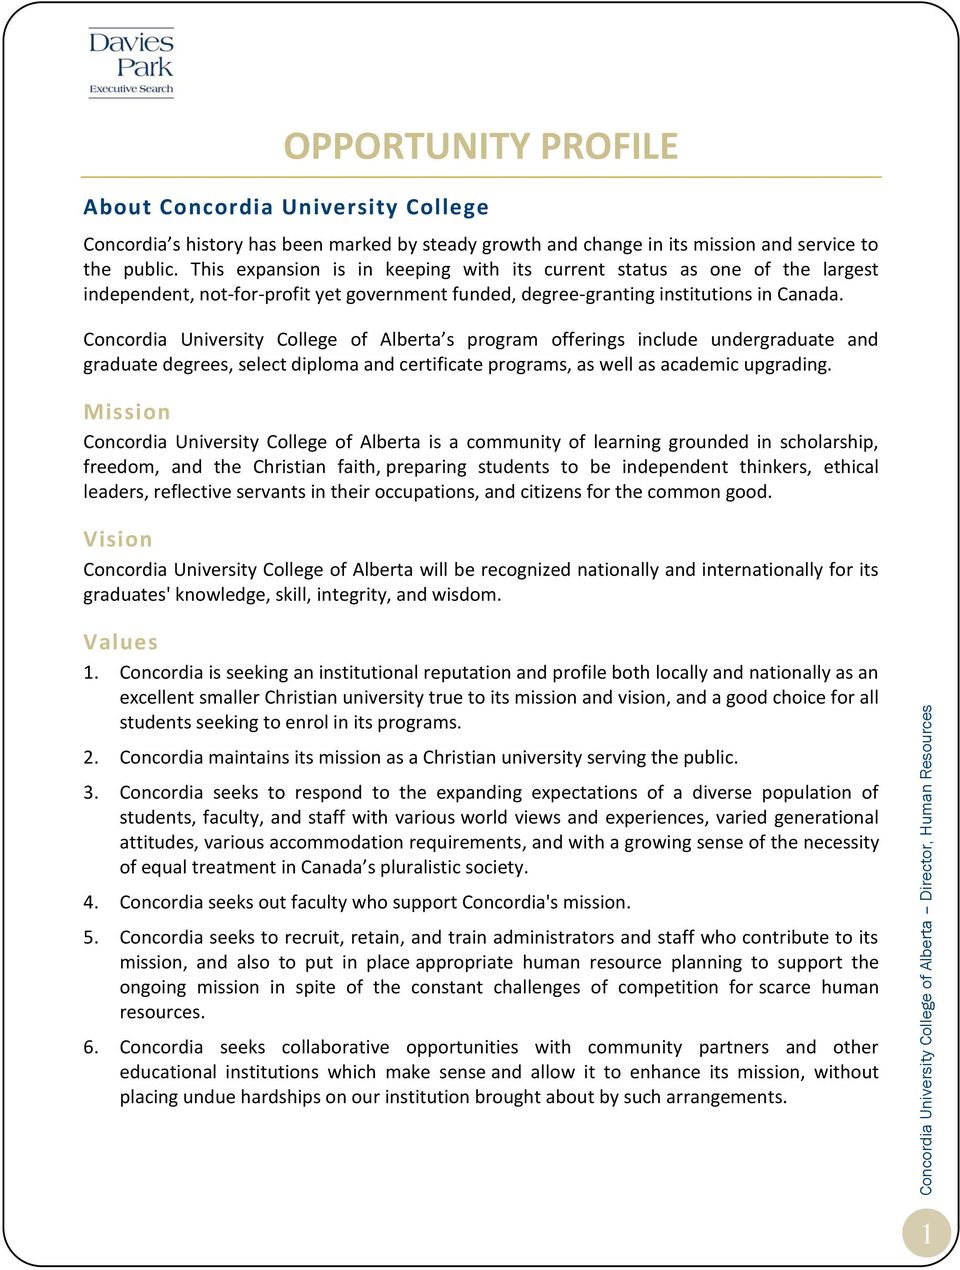 Concordia University College of Alberta s program offerings include undergraduate and graduate degrees, select diploma and certificate programs, as well as academic upgrading.